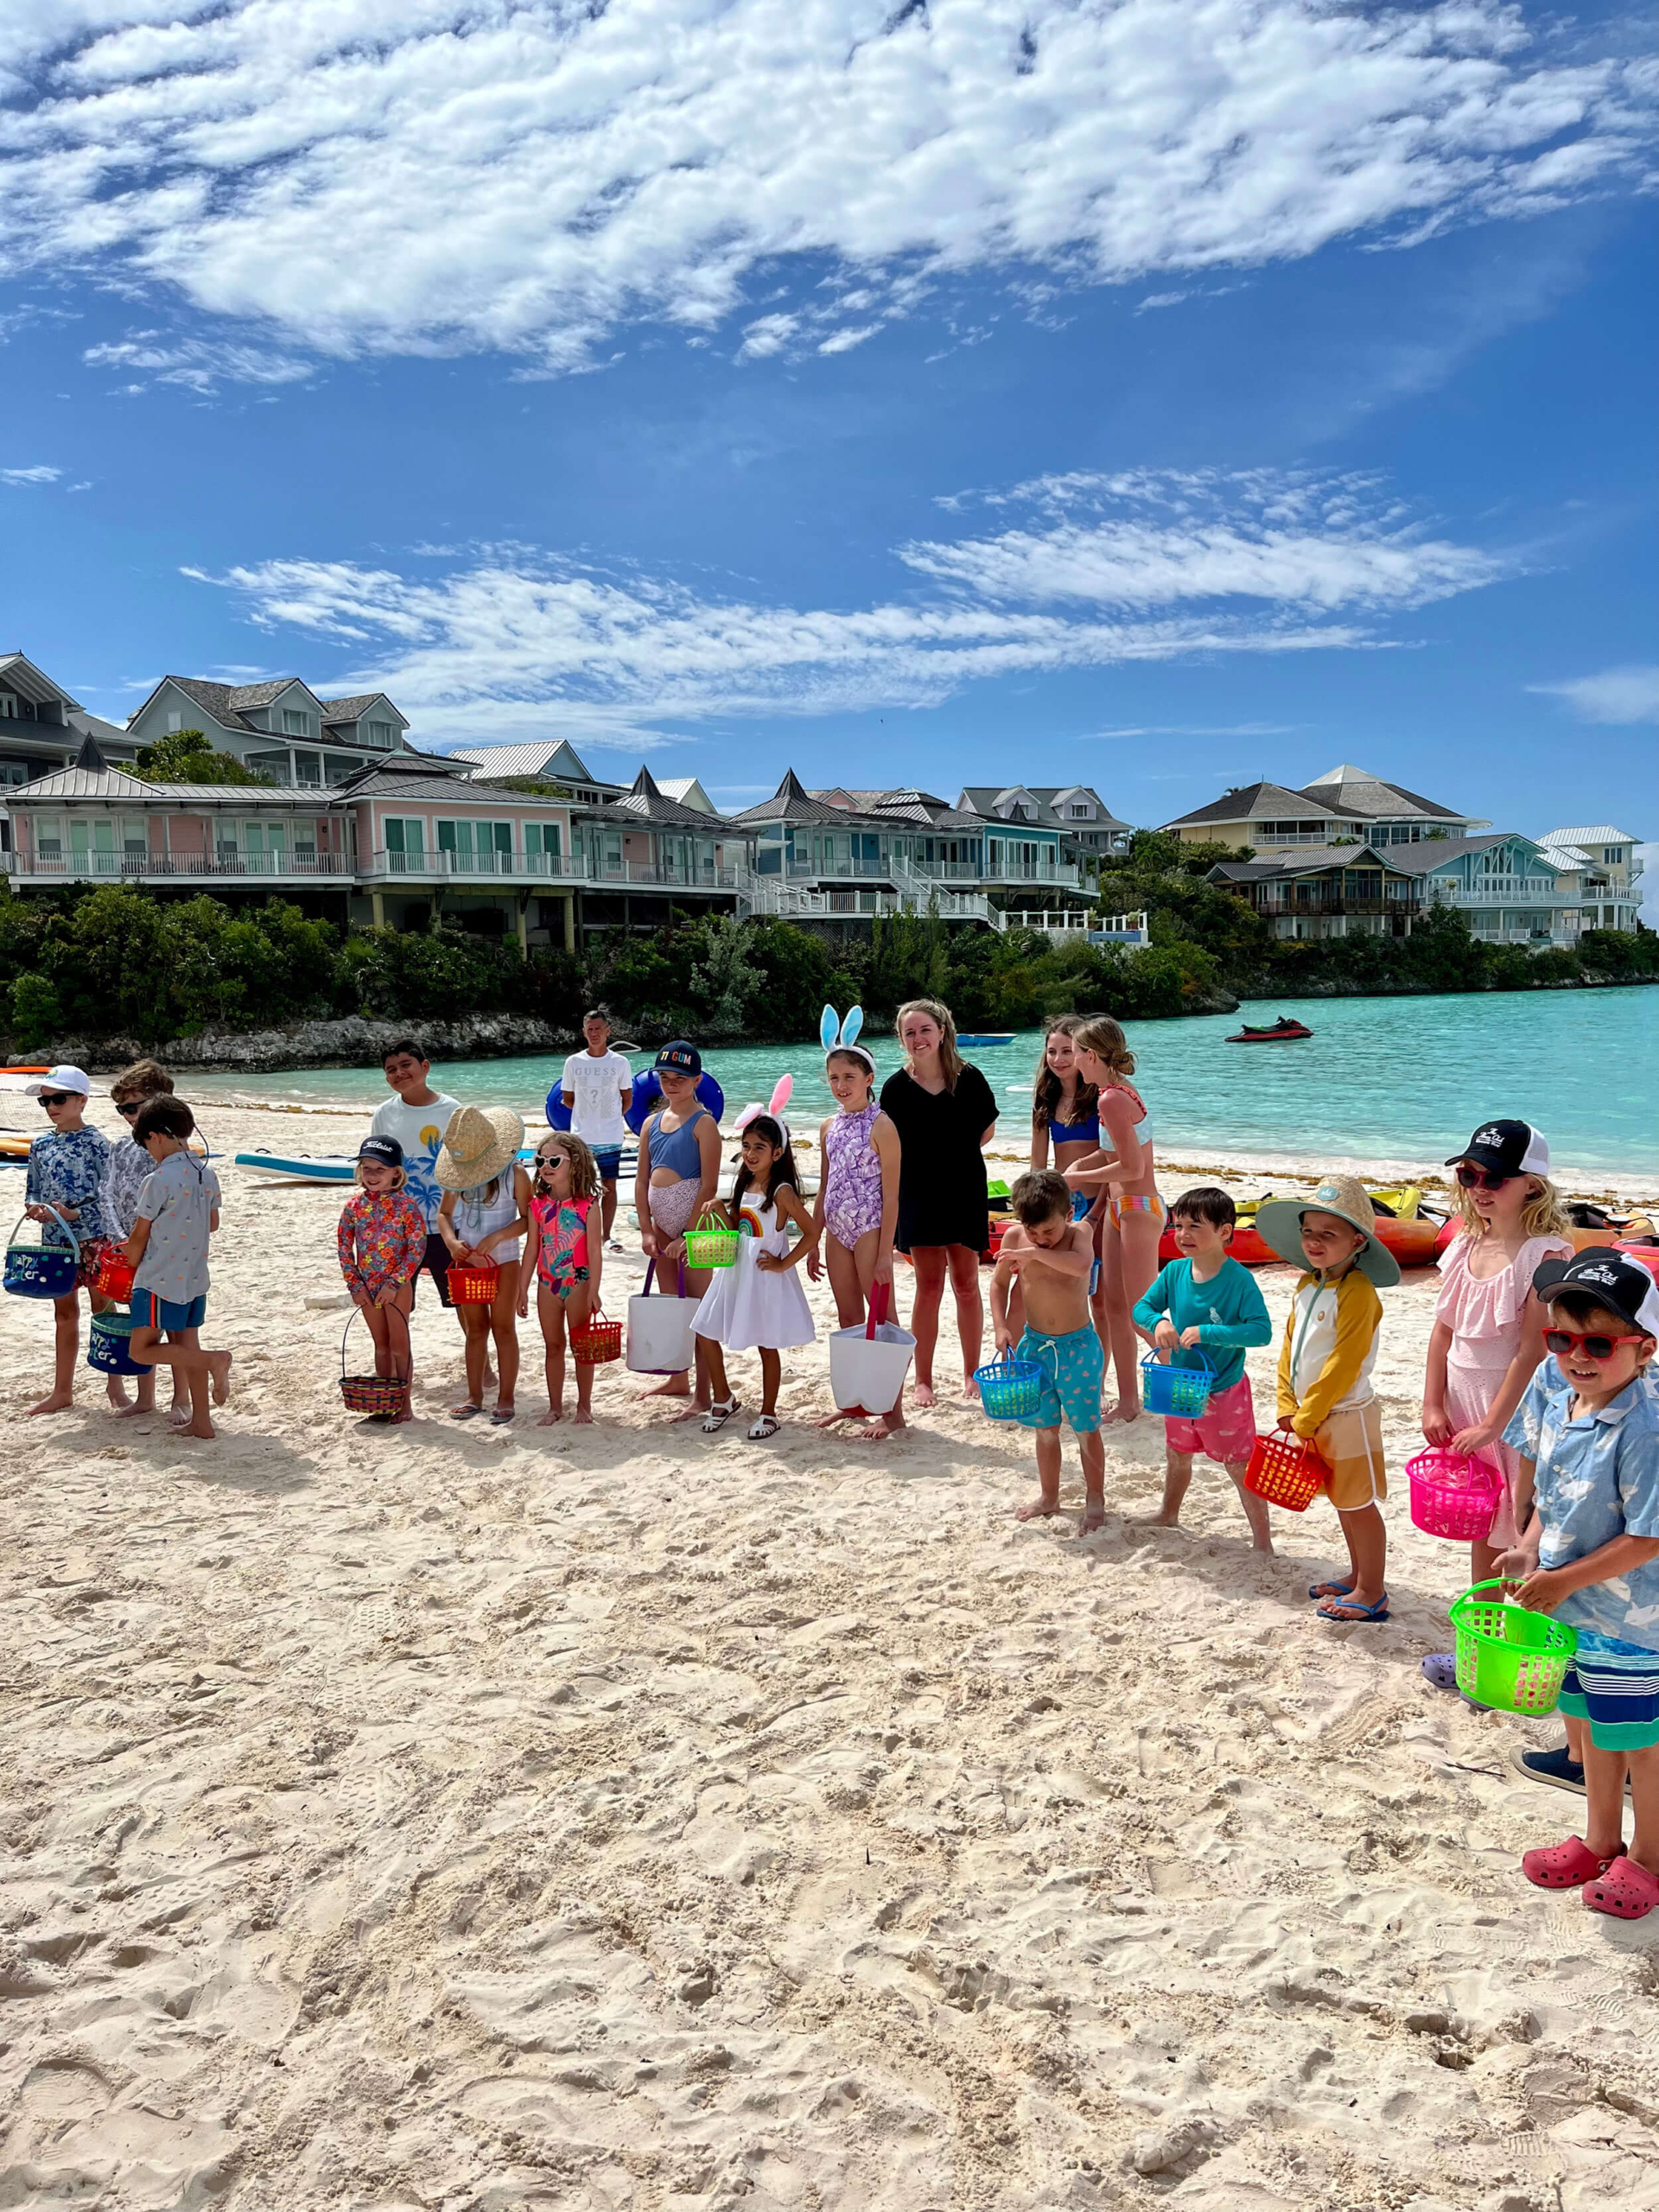 Children participating in a beachside event at The Abaco Club, depicting a vibrant club lifestyle